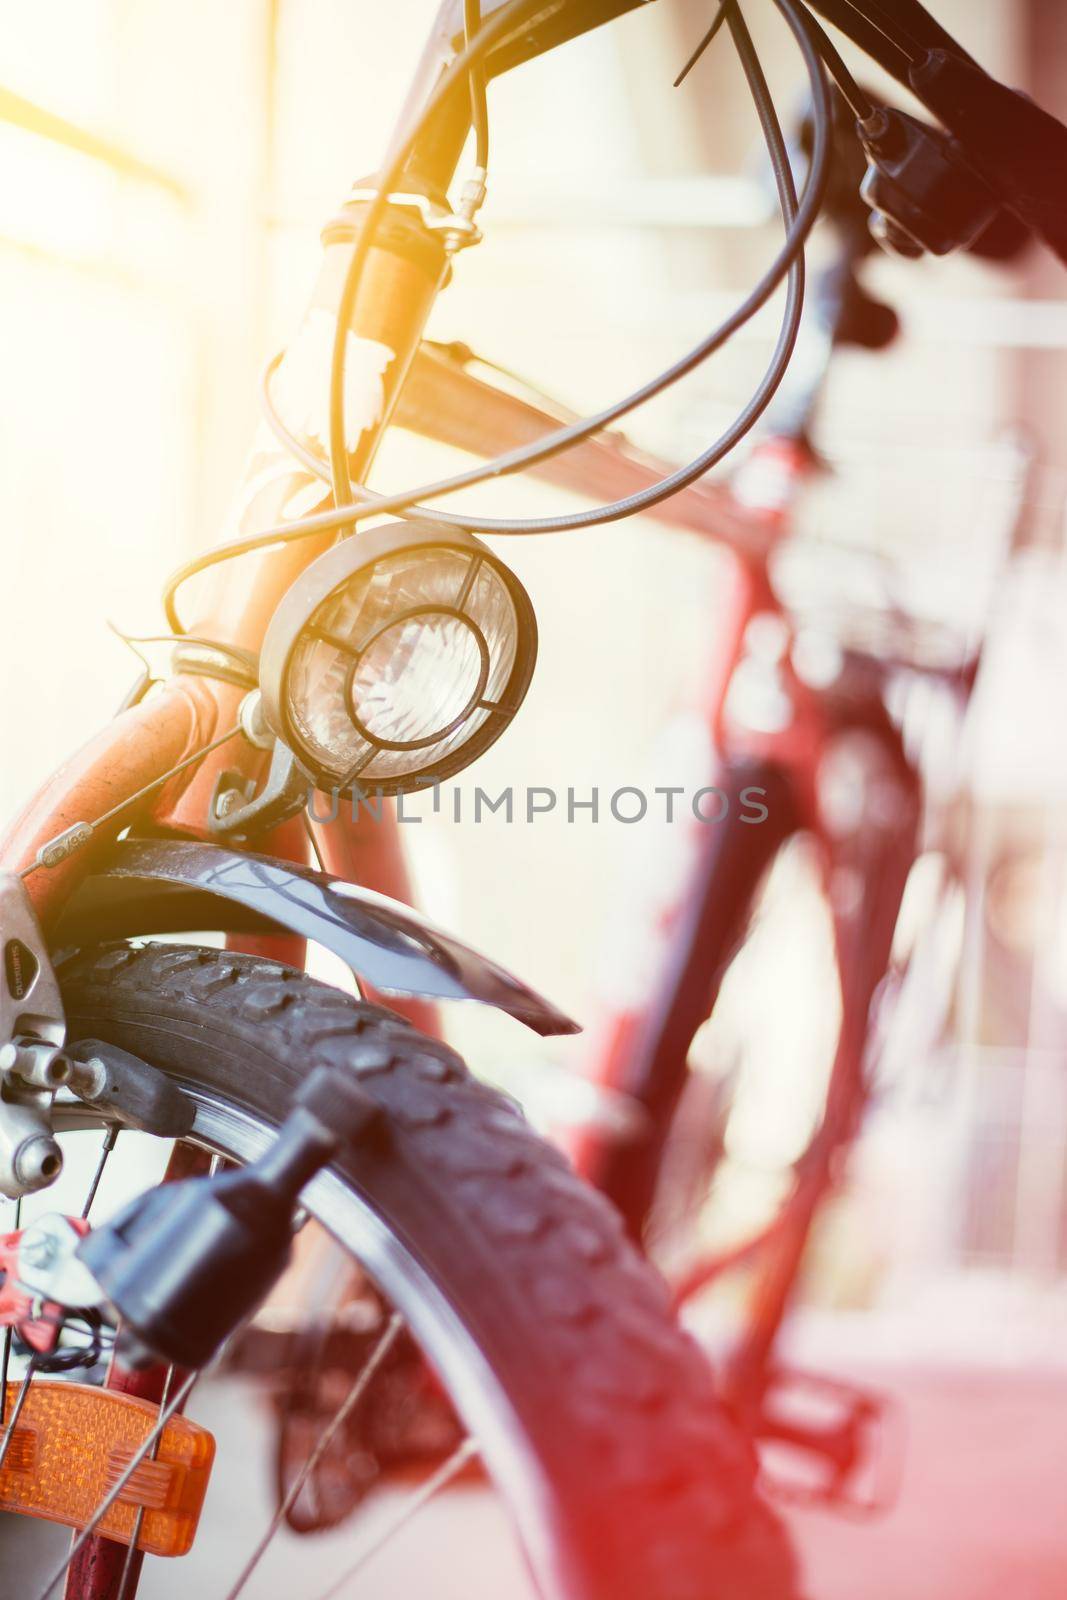 Bike in the city: Front picture of a city bike, blurred background by Daxenbichler